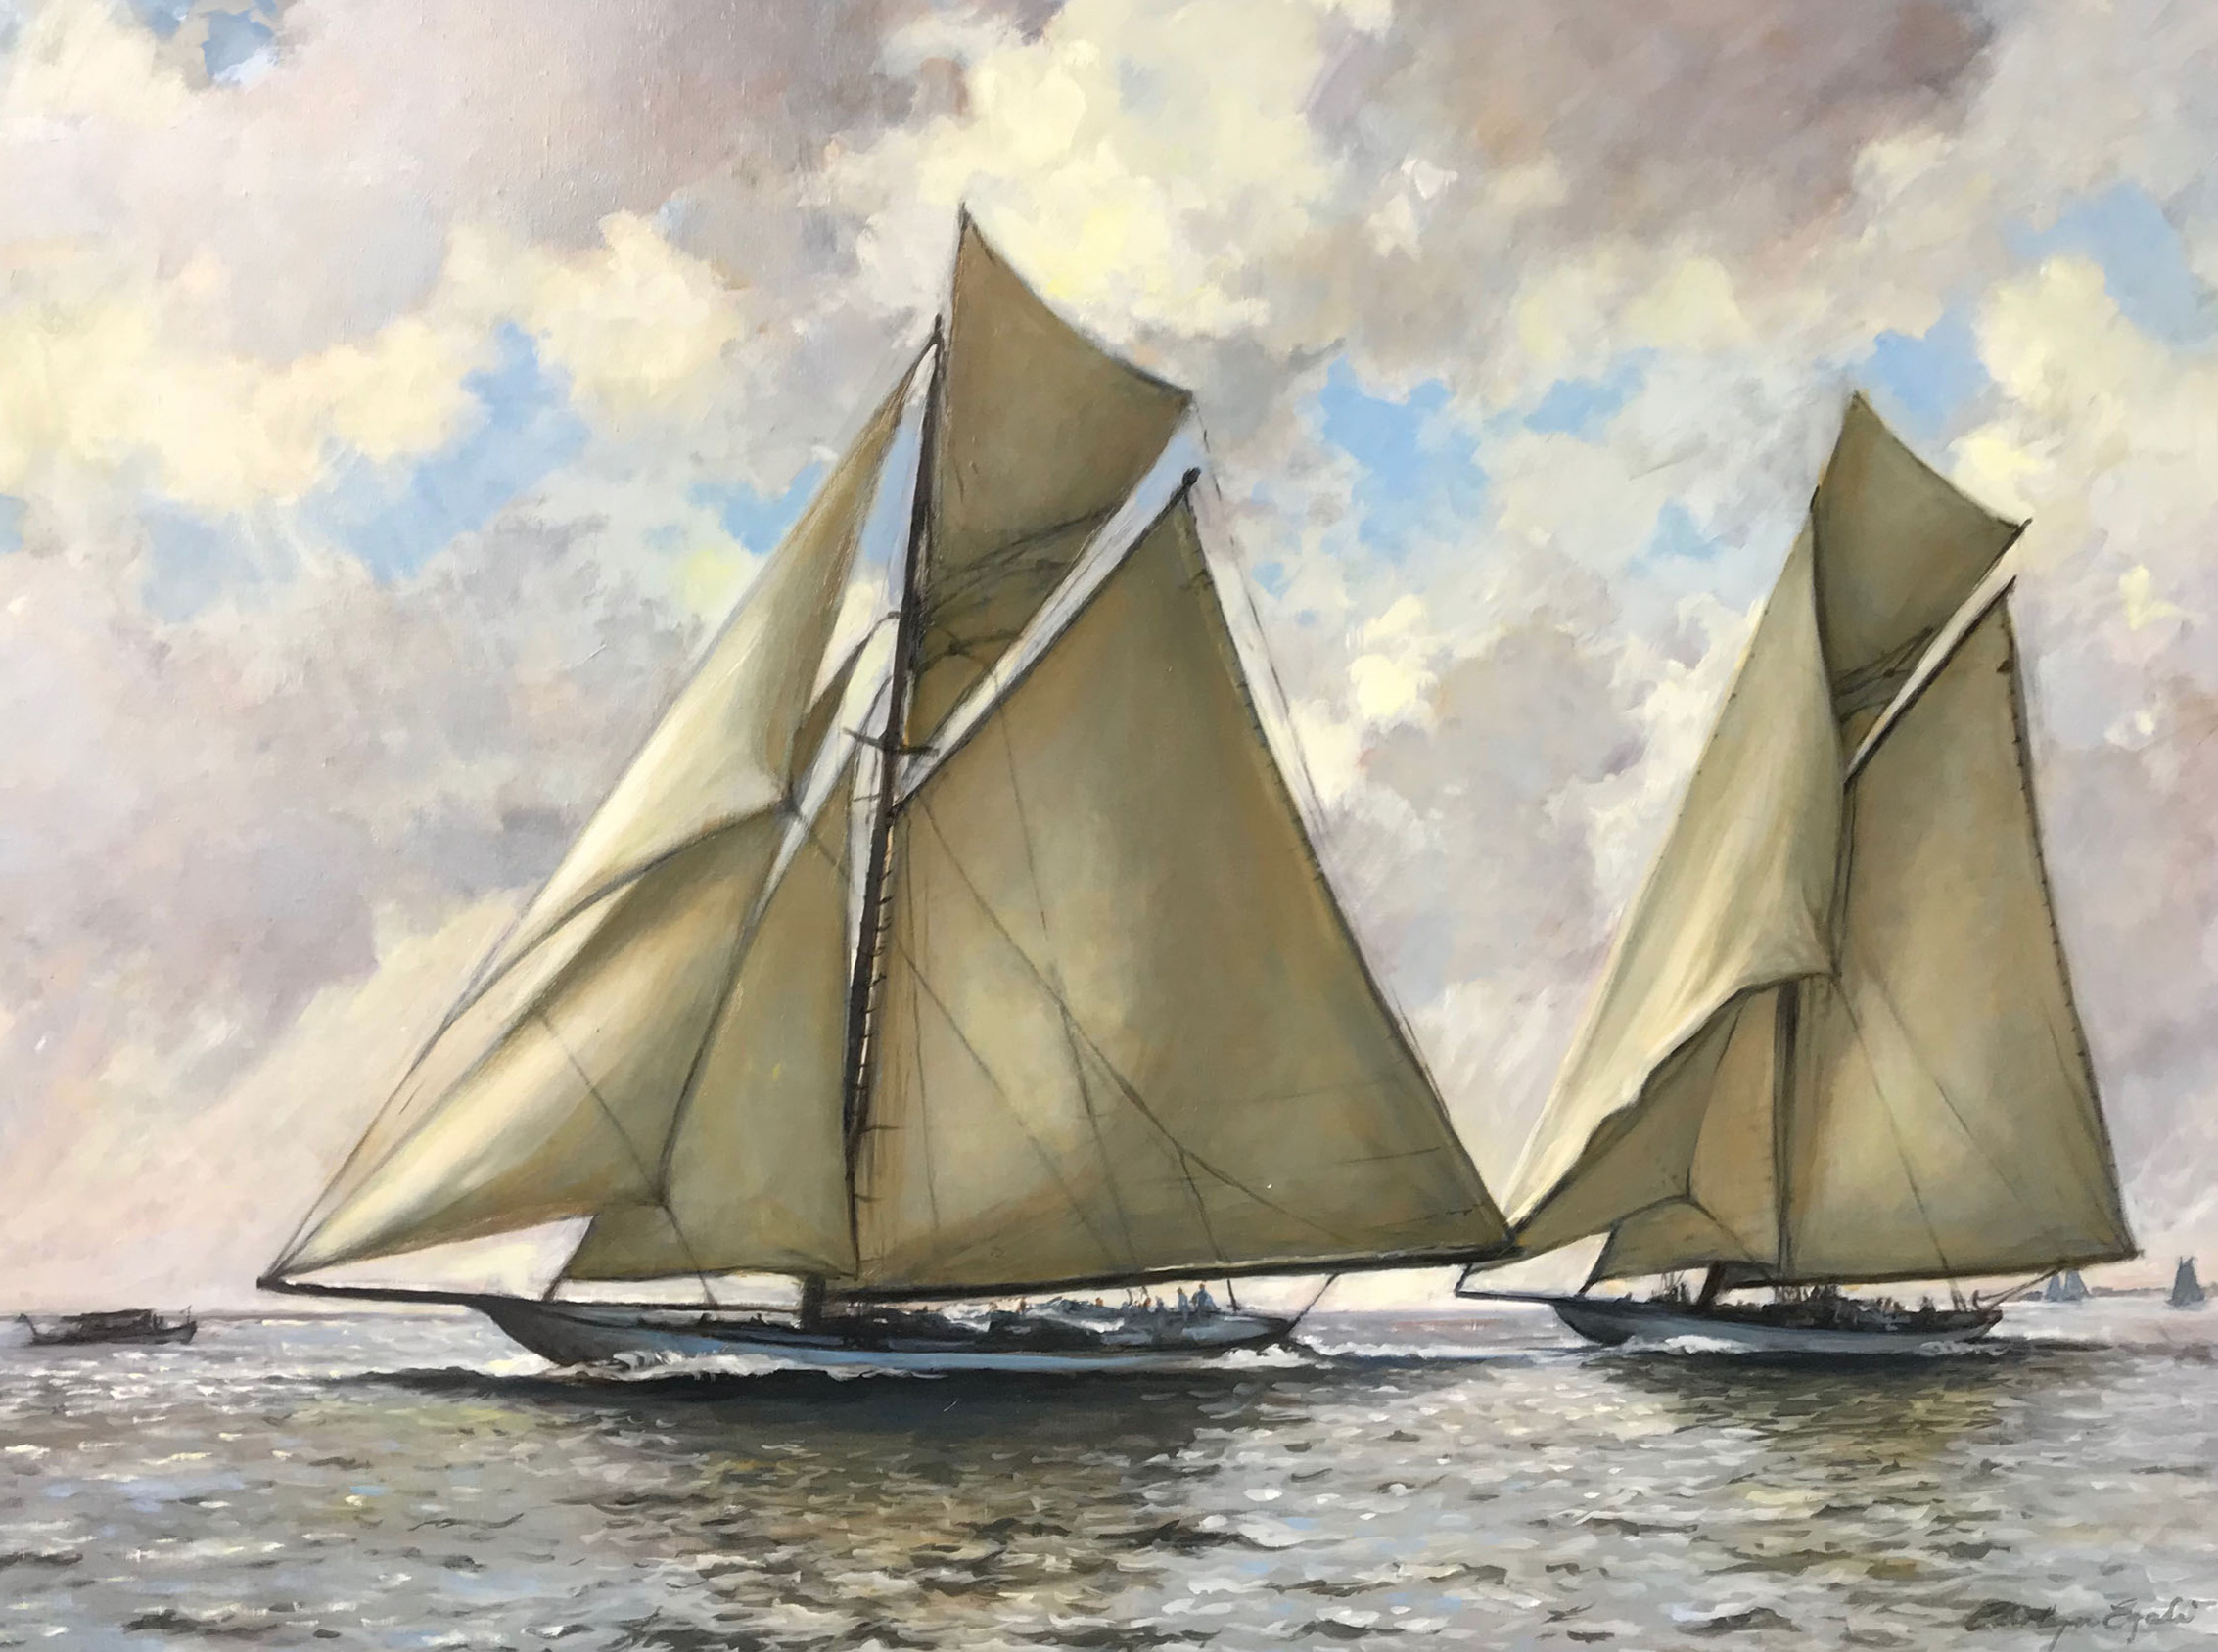 Columbia and The Defender, 1899, 36” x 48”